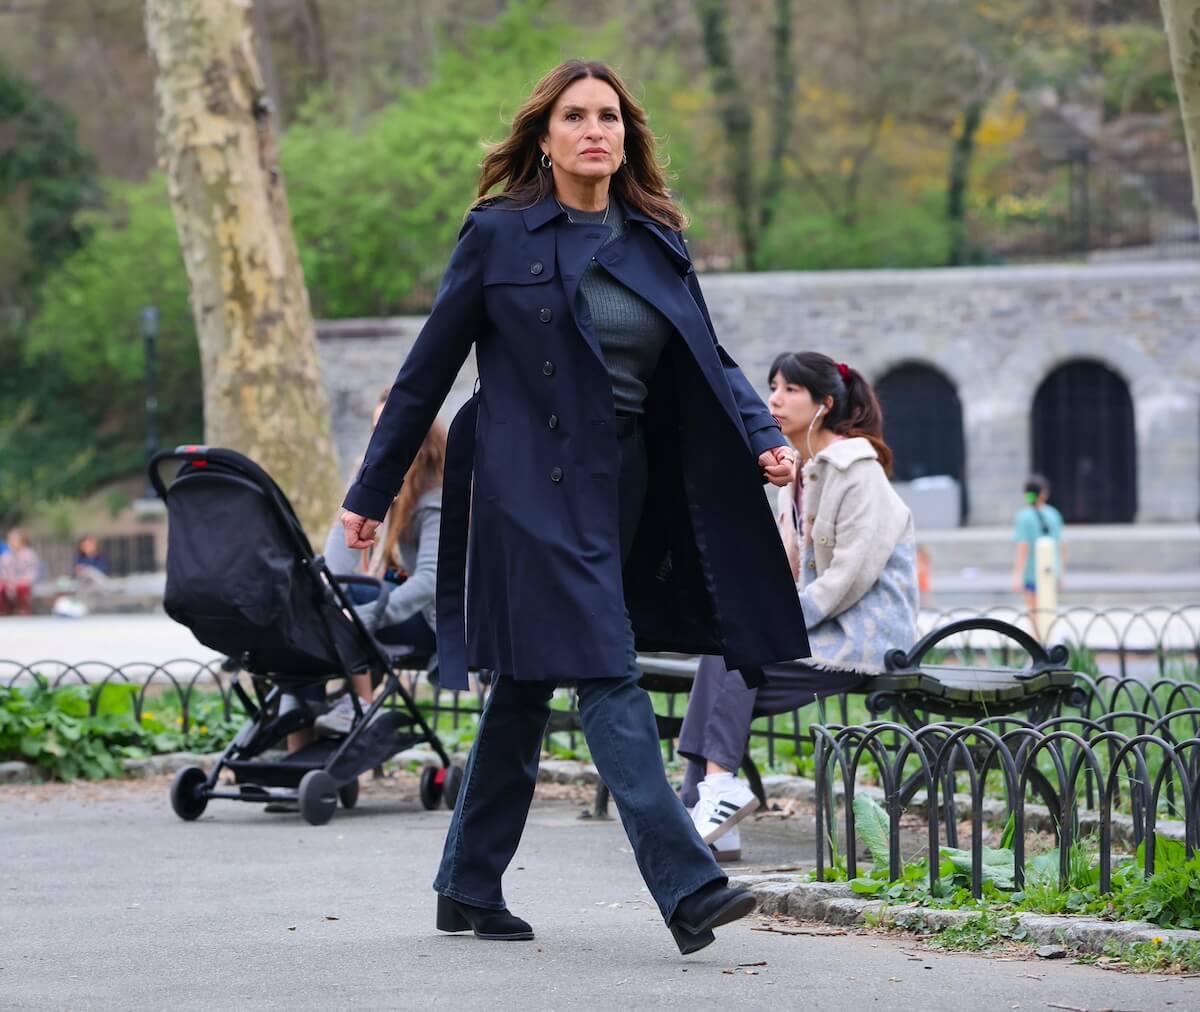 Mariska Hargitay, dressed in black, walks in a park while filming an episode of 'Law and Order: SVU'